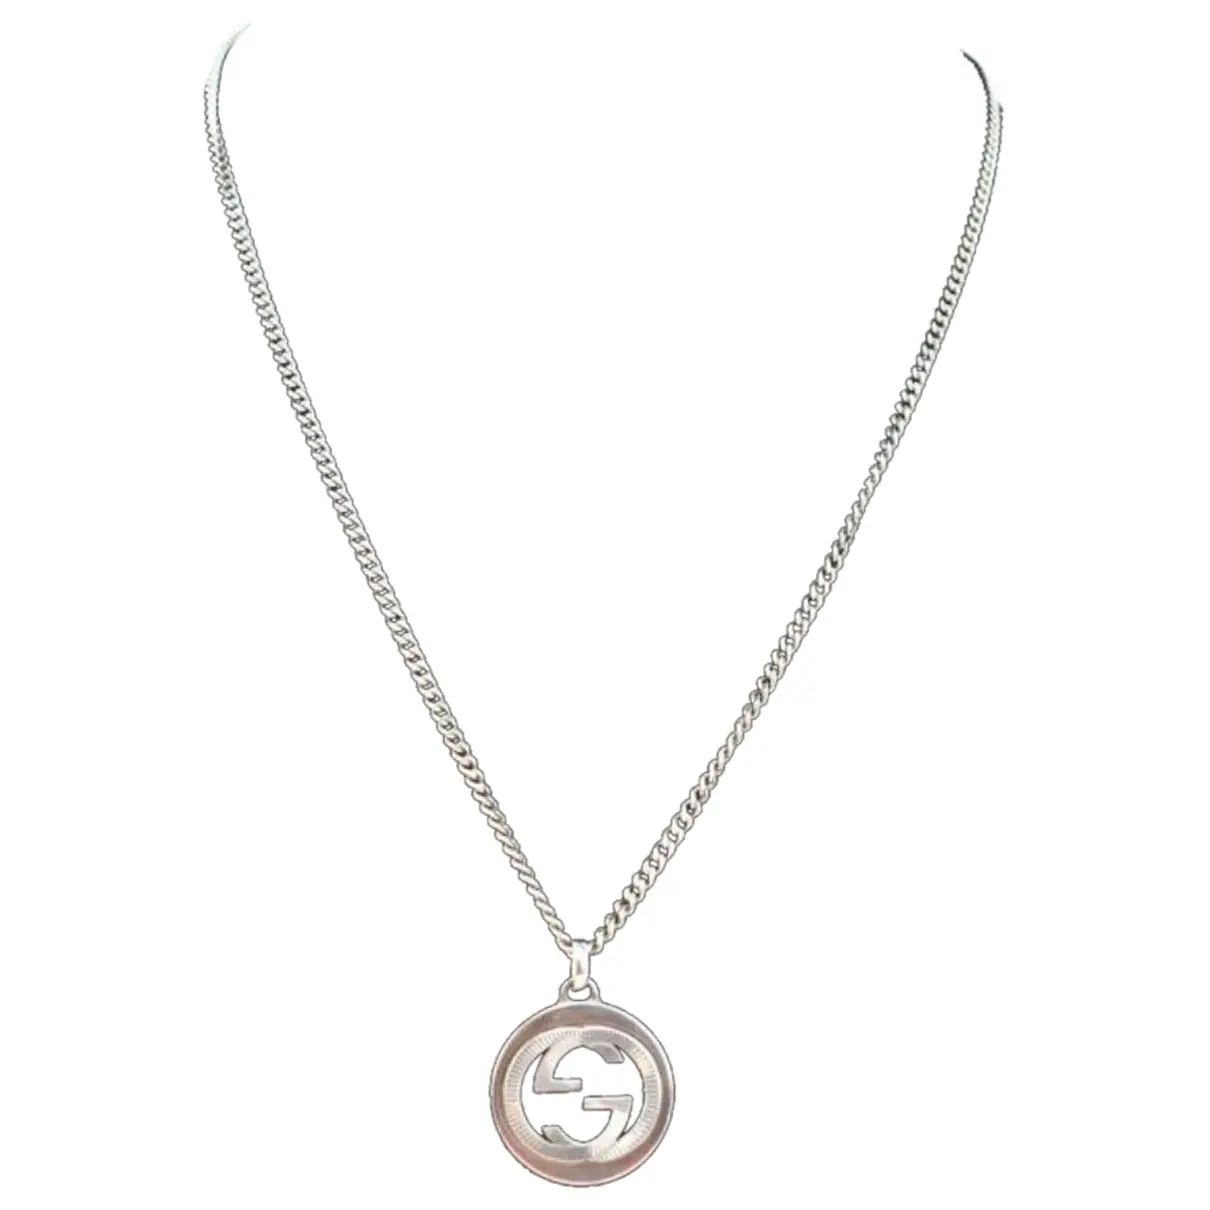 GG Running silver necklace